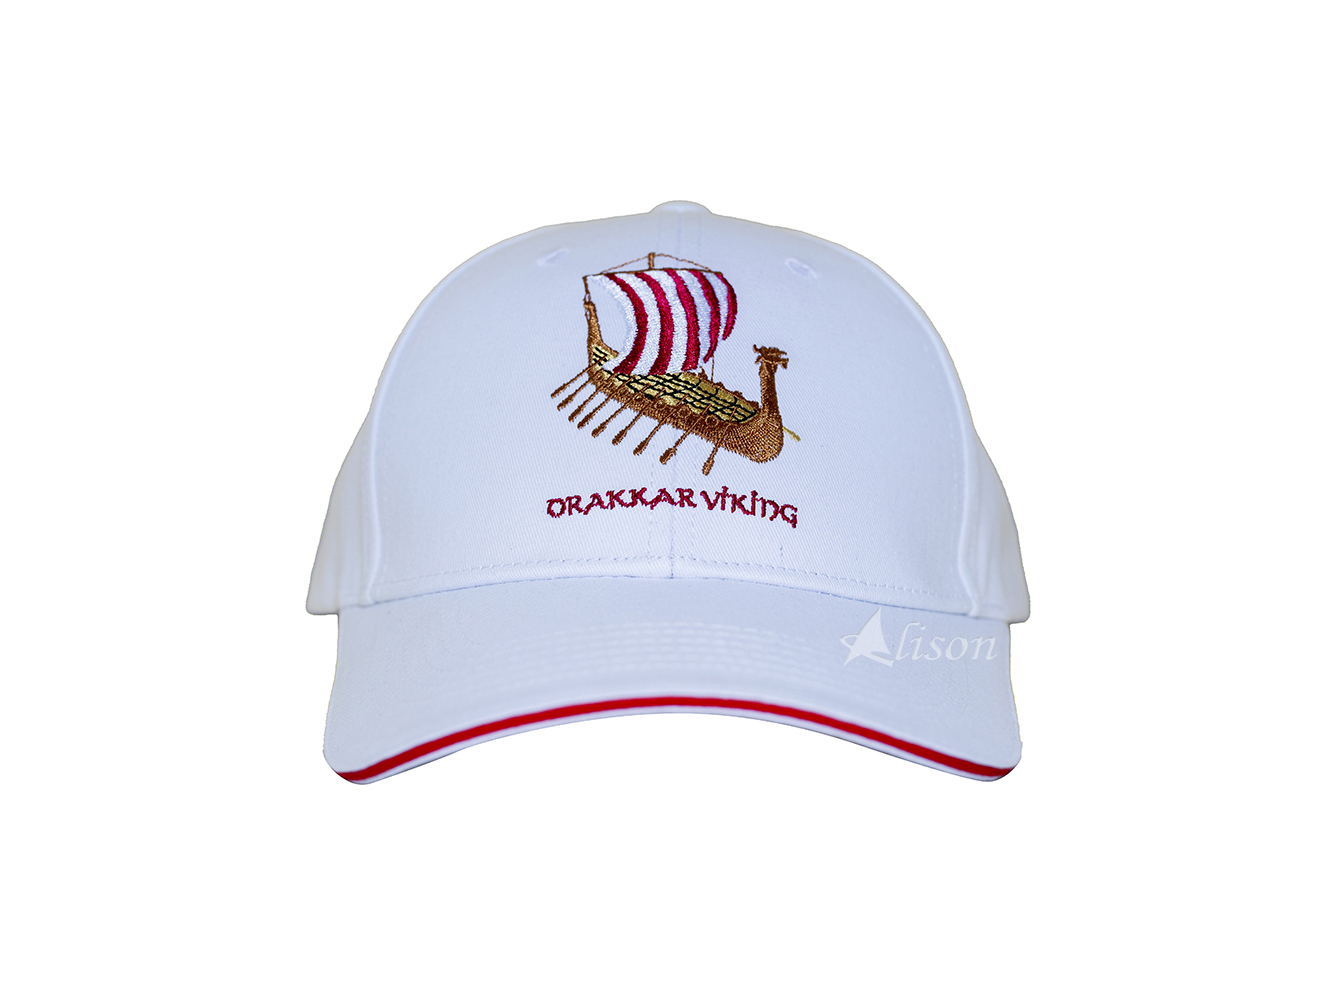 FA003 Drakkar Viking Embroidered Cap in White by Alison Nautical fa003-drakkar-viking-embroidered-cap-in-white-by-alison-nautical-l01.jpg